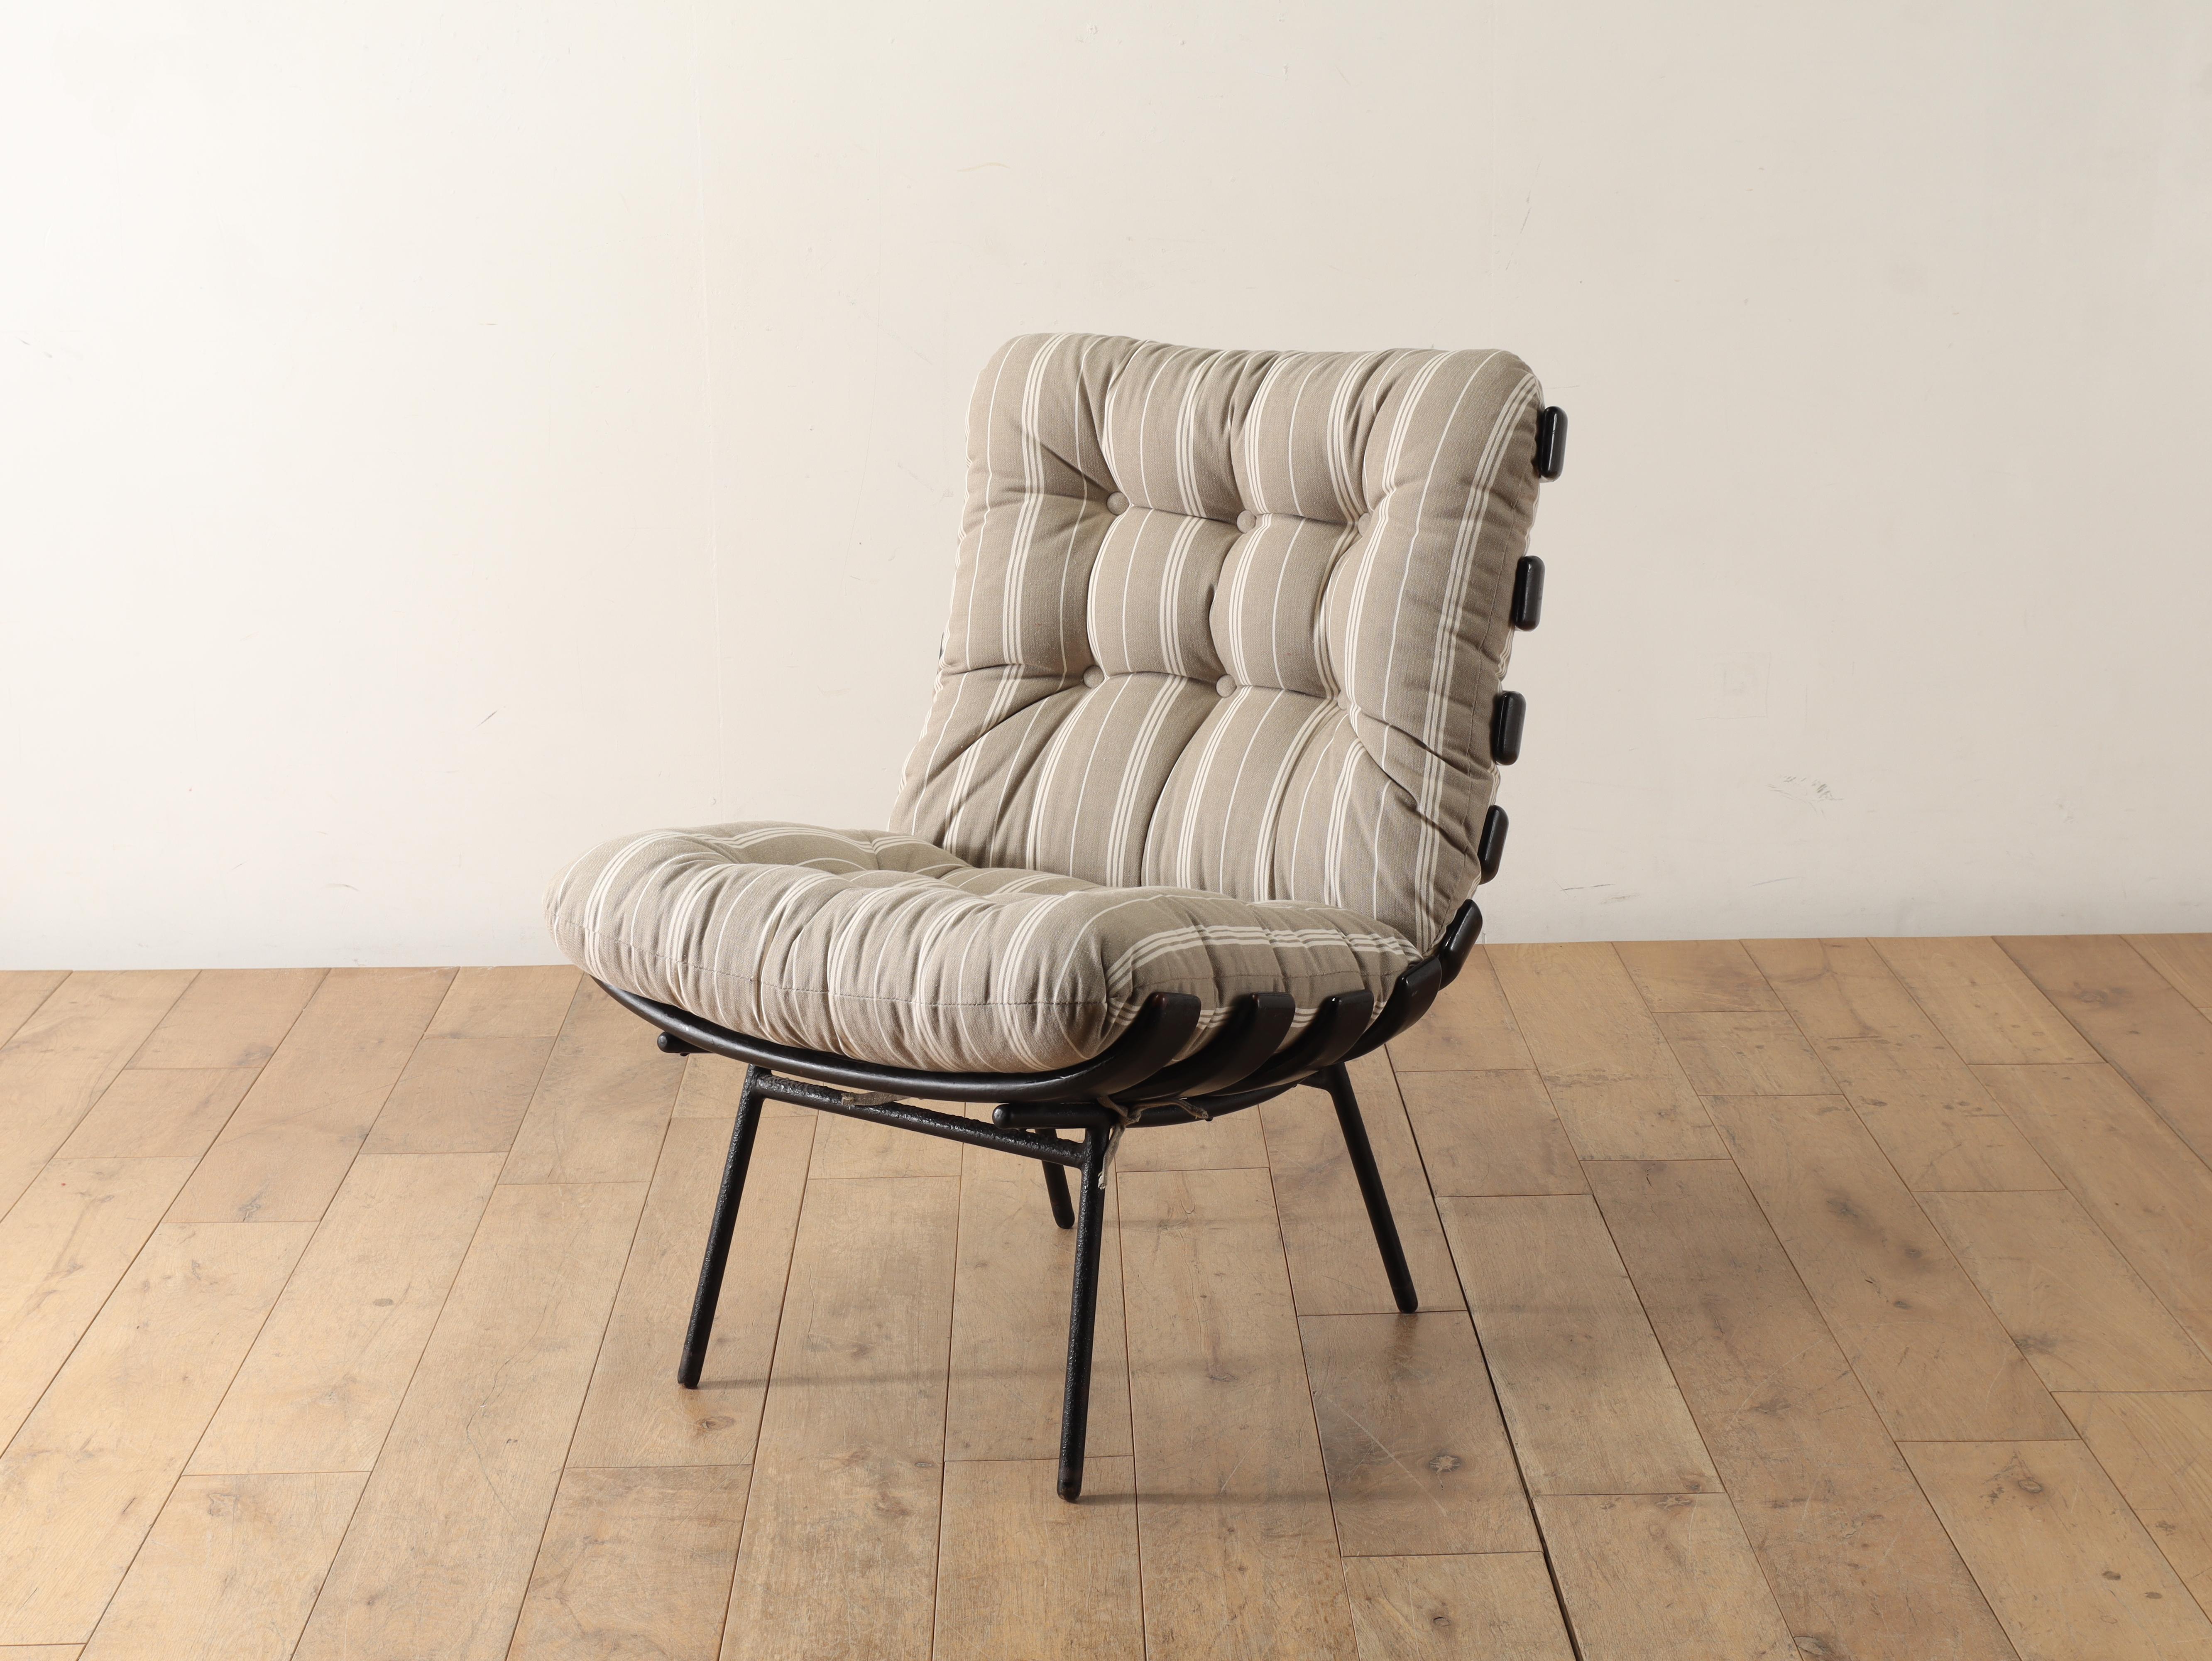 1950s (estimated) Brazilian vintage lounge chair. Native Brazilian wood, invuia, also known as Brazilian walnut, has a great appeal due to its deep texture. The details created by moulding such wood in a unique form reproduce a style not found in